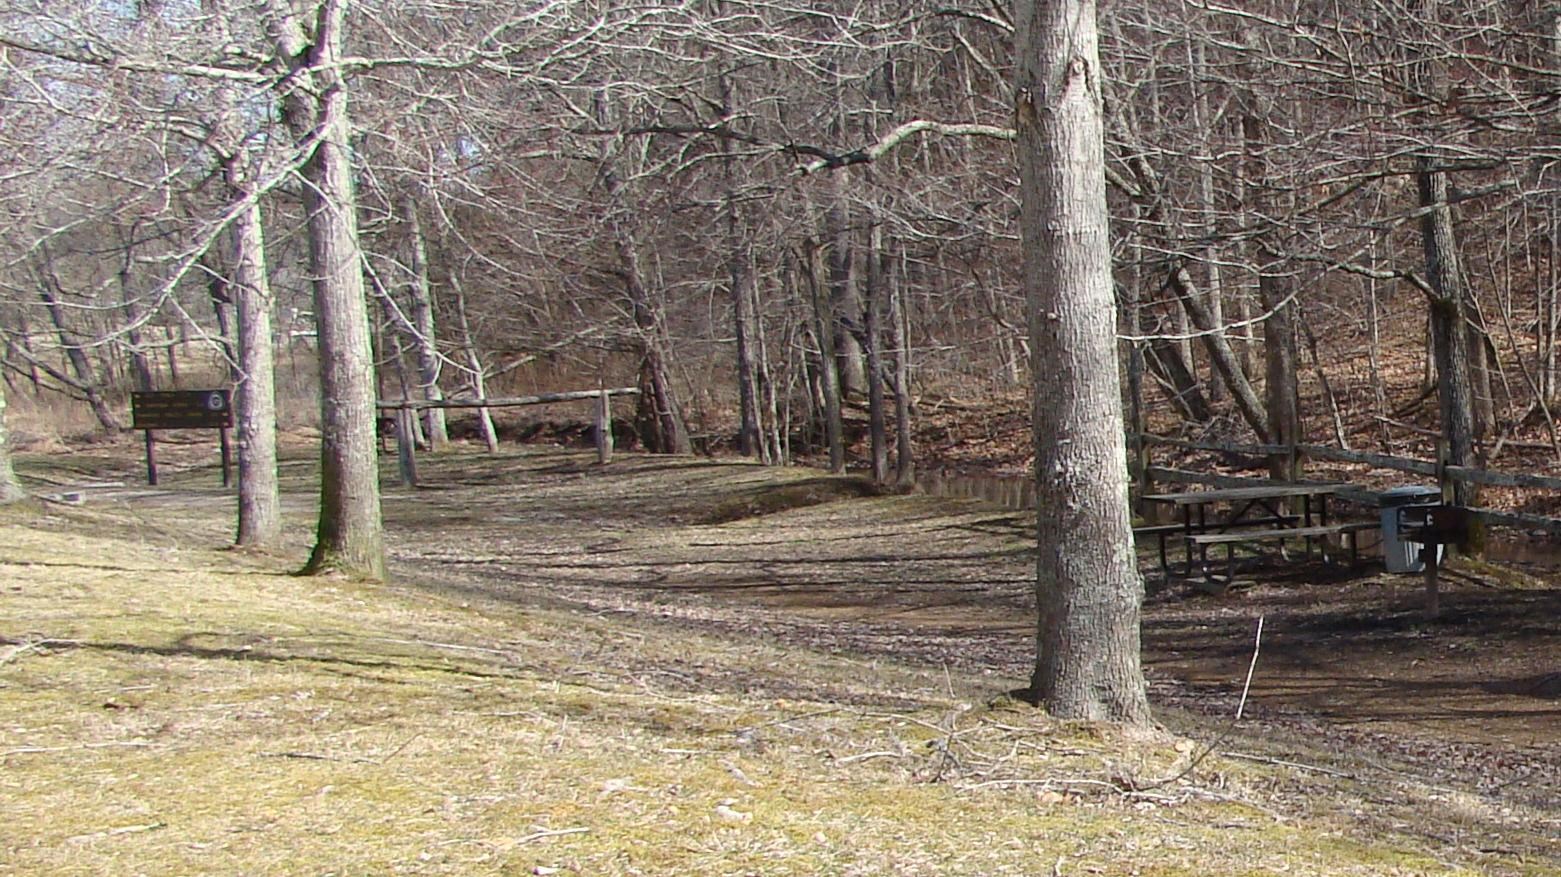 Picnic area with two picnic tables near a wooden fence and creek.